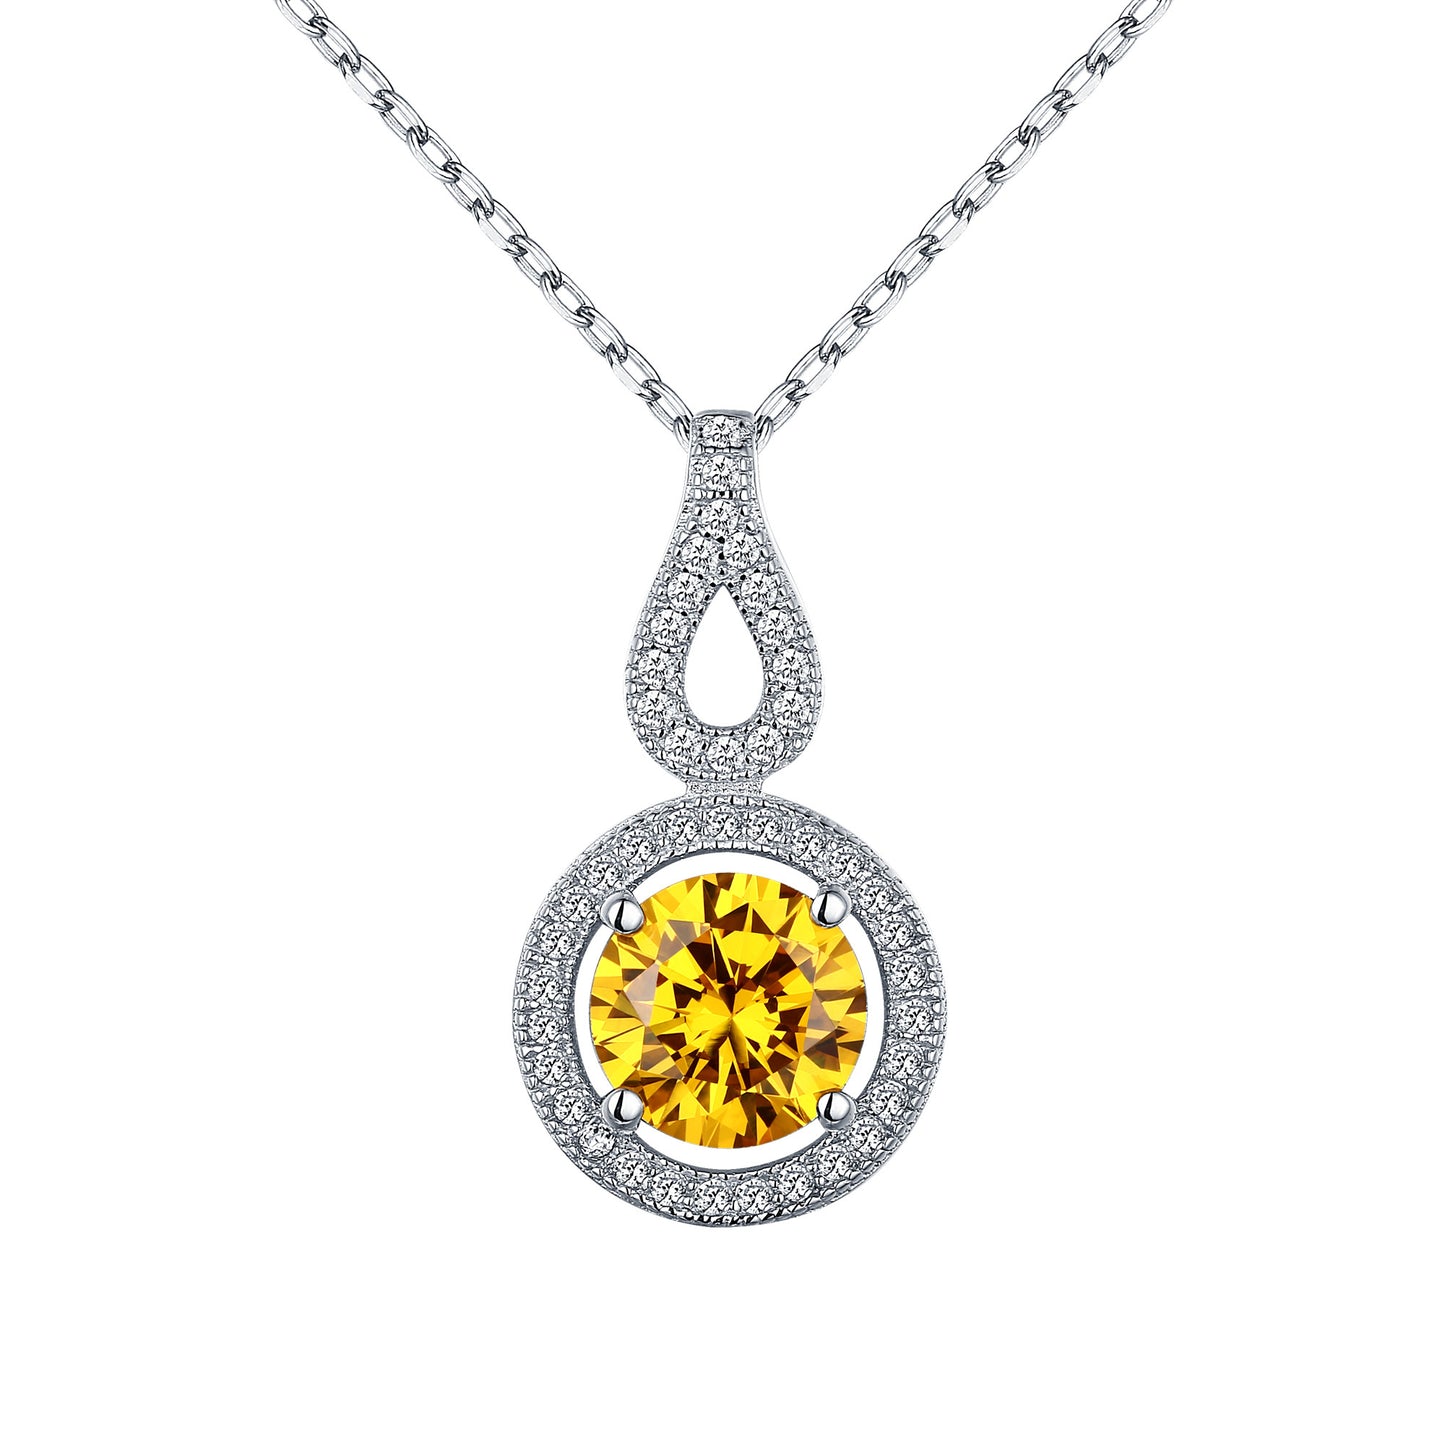 Womens Yellow Solitaire Pendant White Gold Over 925 Silver Chain